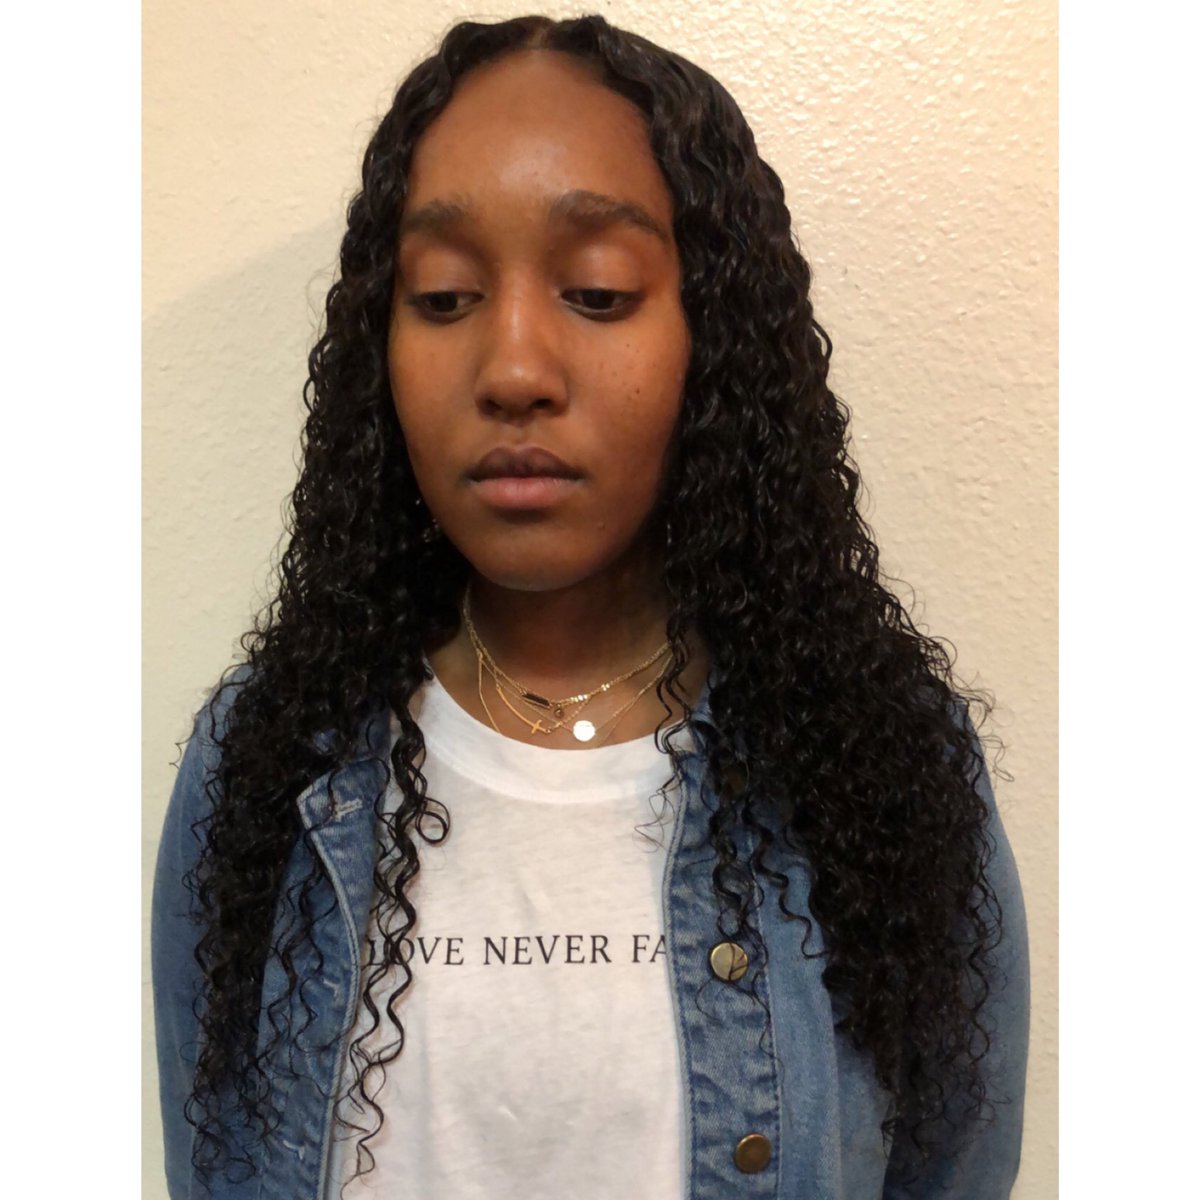 Wet Styling | New Clients Accepted ✨ Click on the link in my bio for booking✨ | #HoustonHair #HoustonHairstylist #TexasHair #TexasHairstylist #HoustonNaturals #SilkPress #SewIn #PearlandHair #PearlandHairstylist #HoustonLaceClosure #Houstonbobs #houstoncolorist #HoustonFrontals